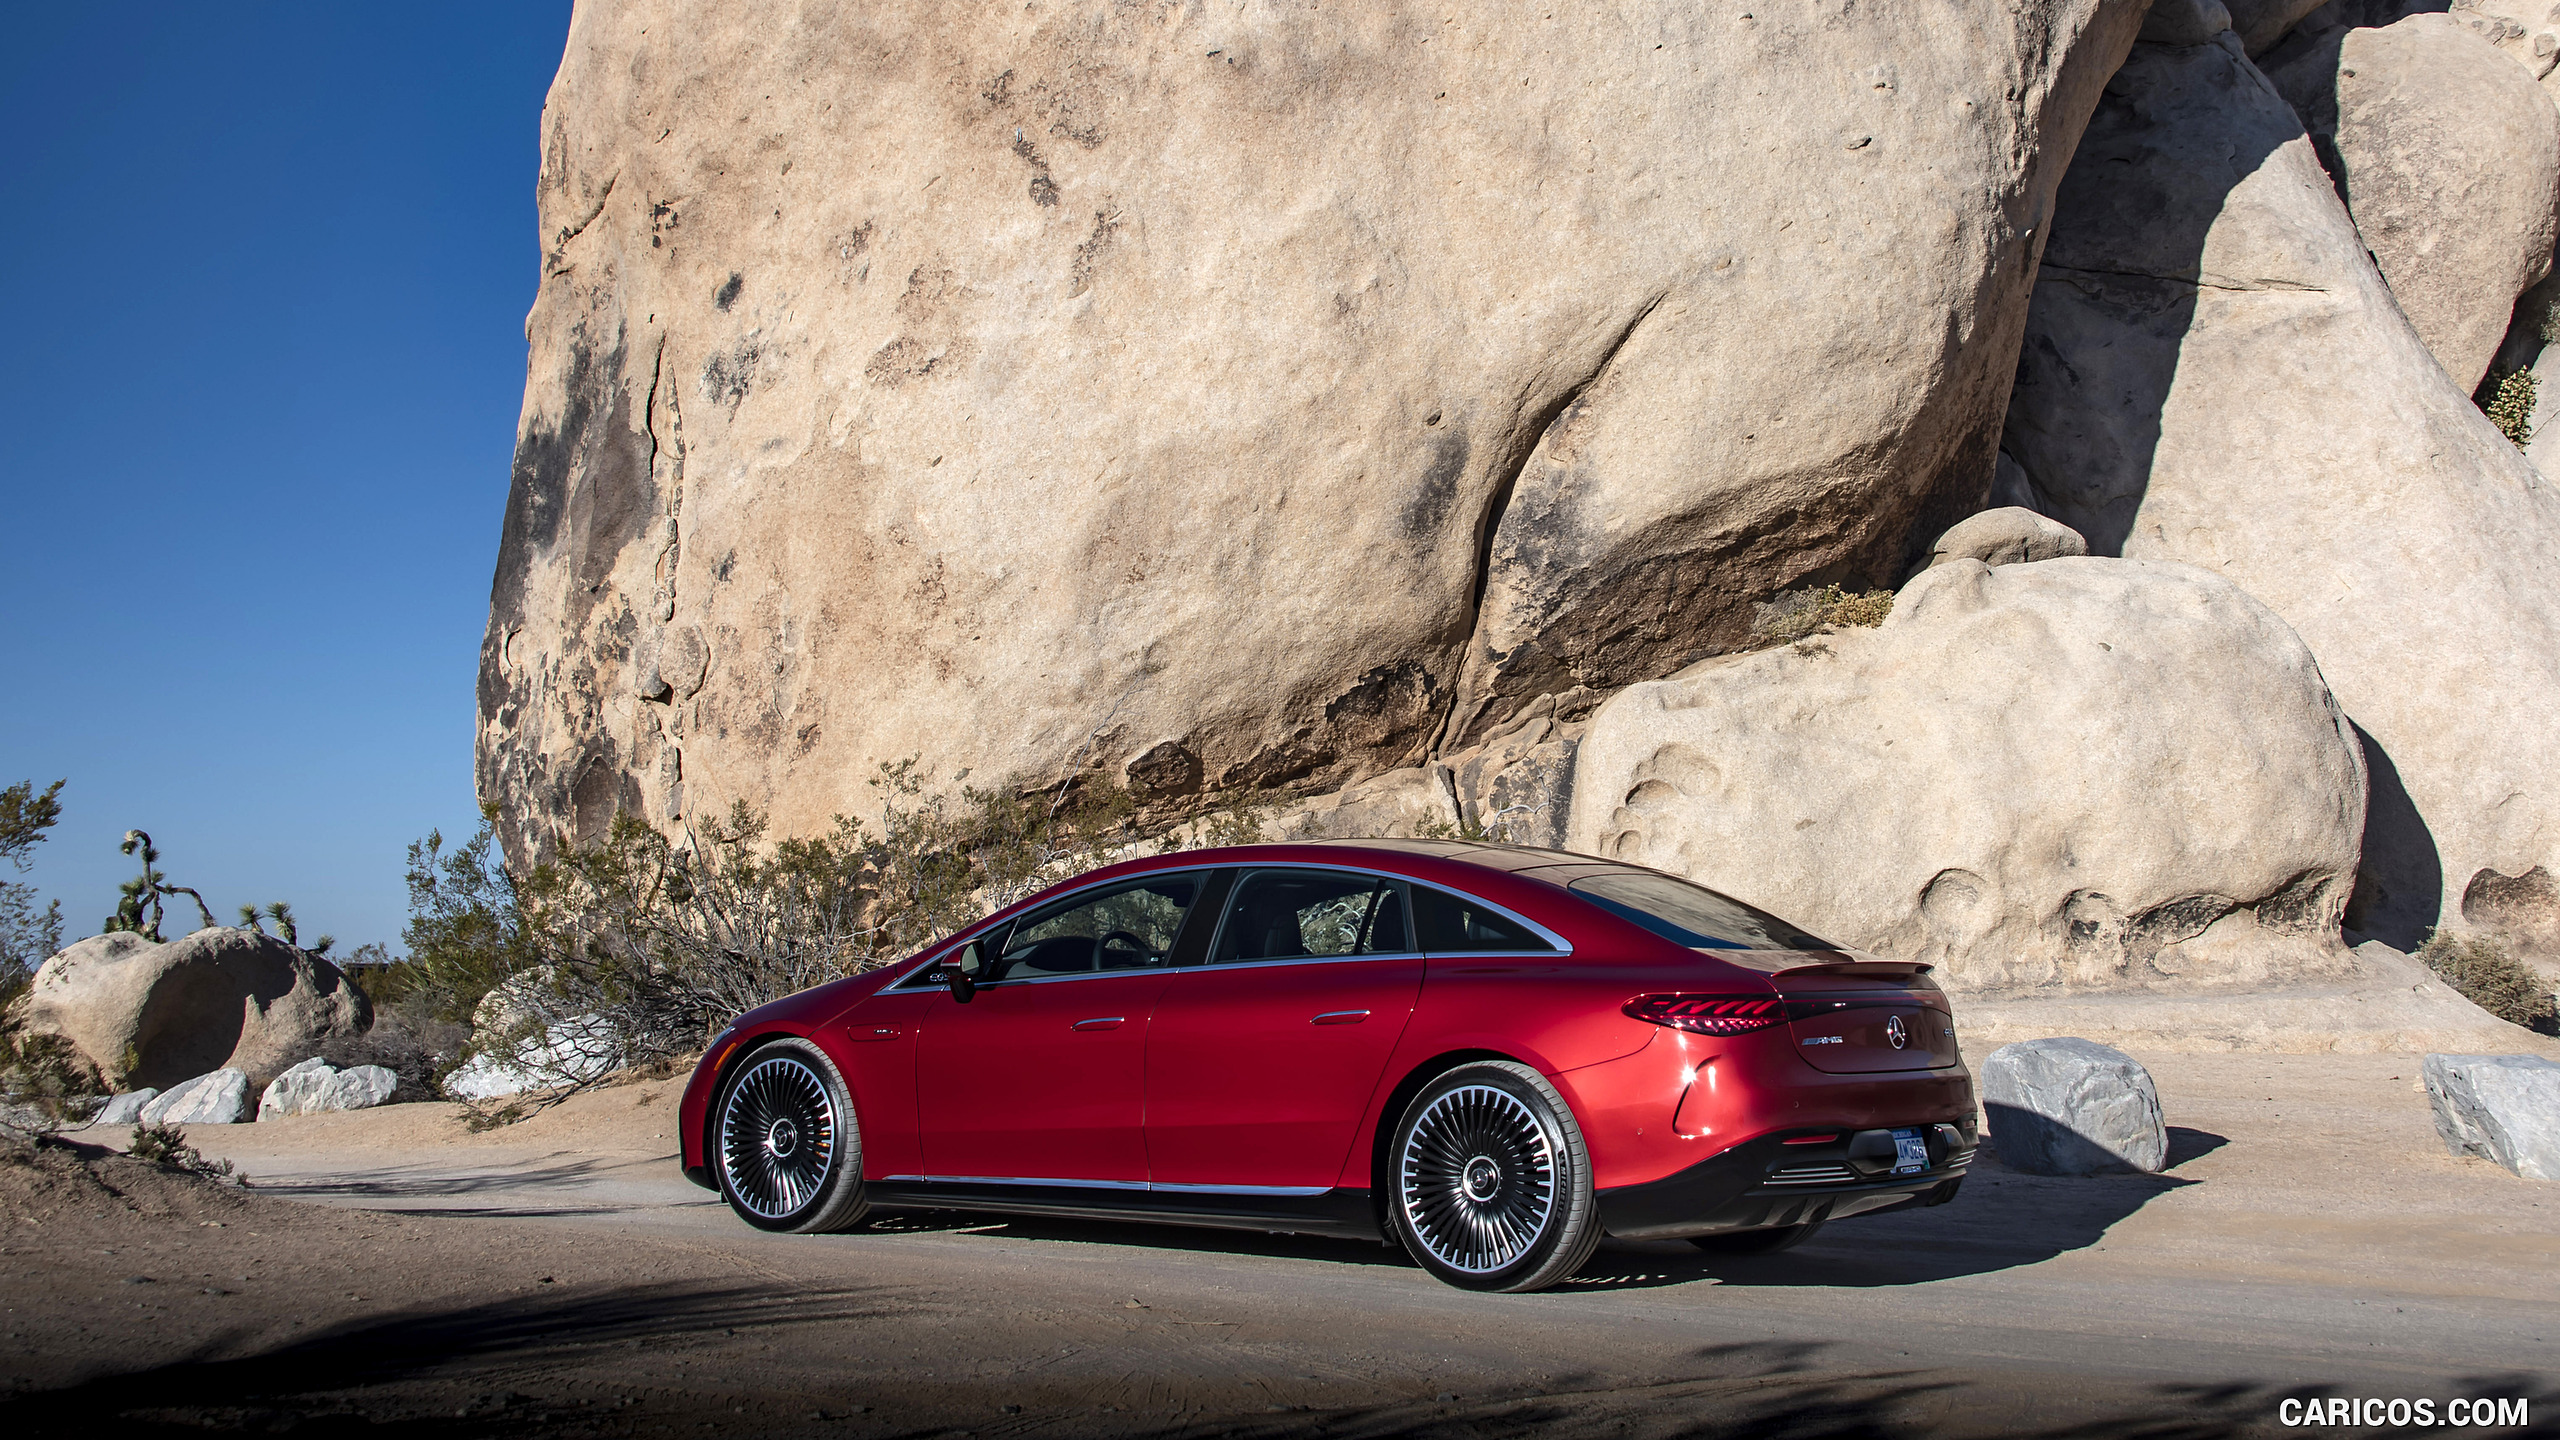 2022 Mercedes-AMG EQS 53 4MATIC+ (Color: Hyazinth Red Metallic) - Side, #60 of 76